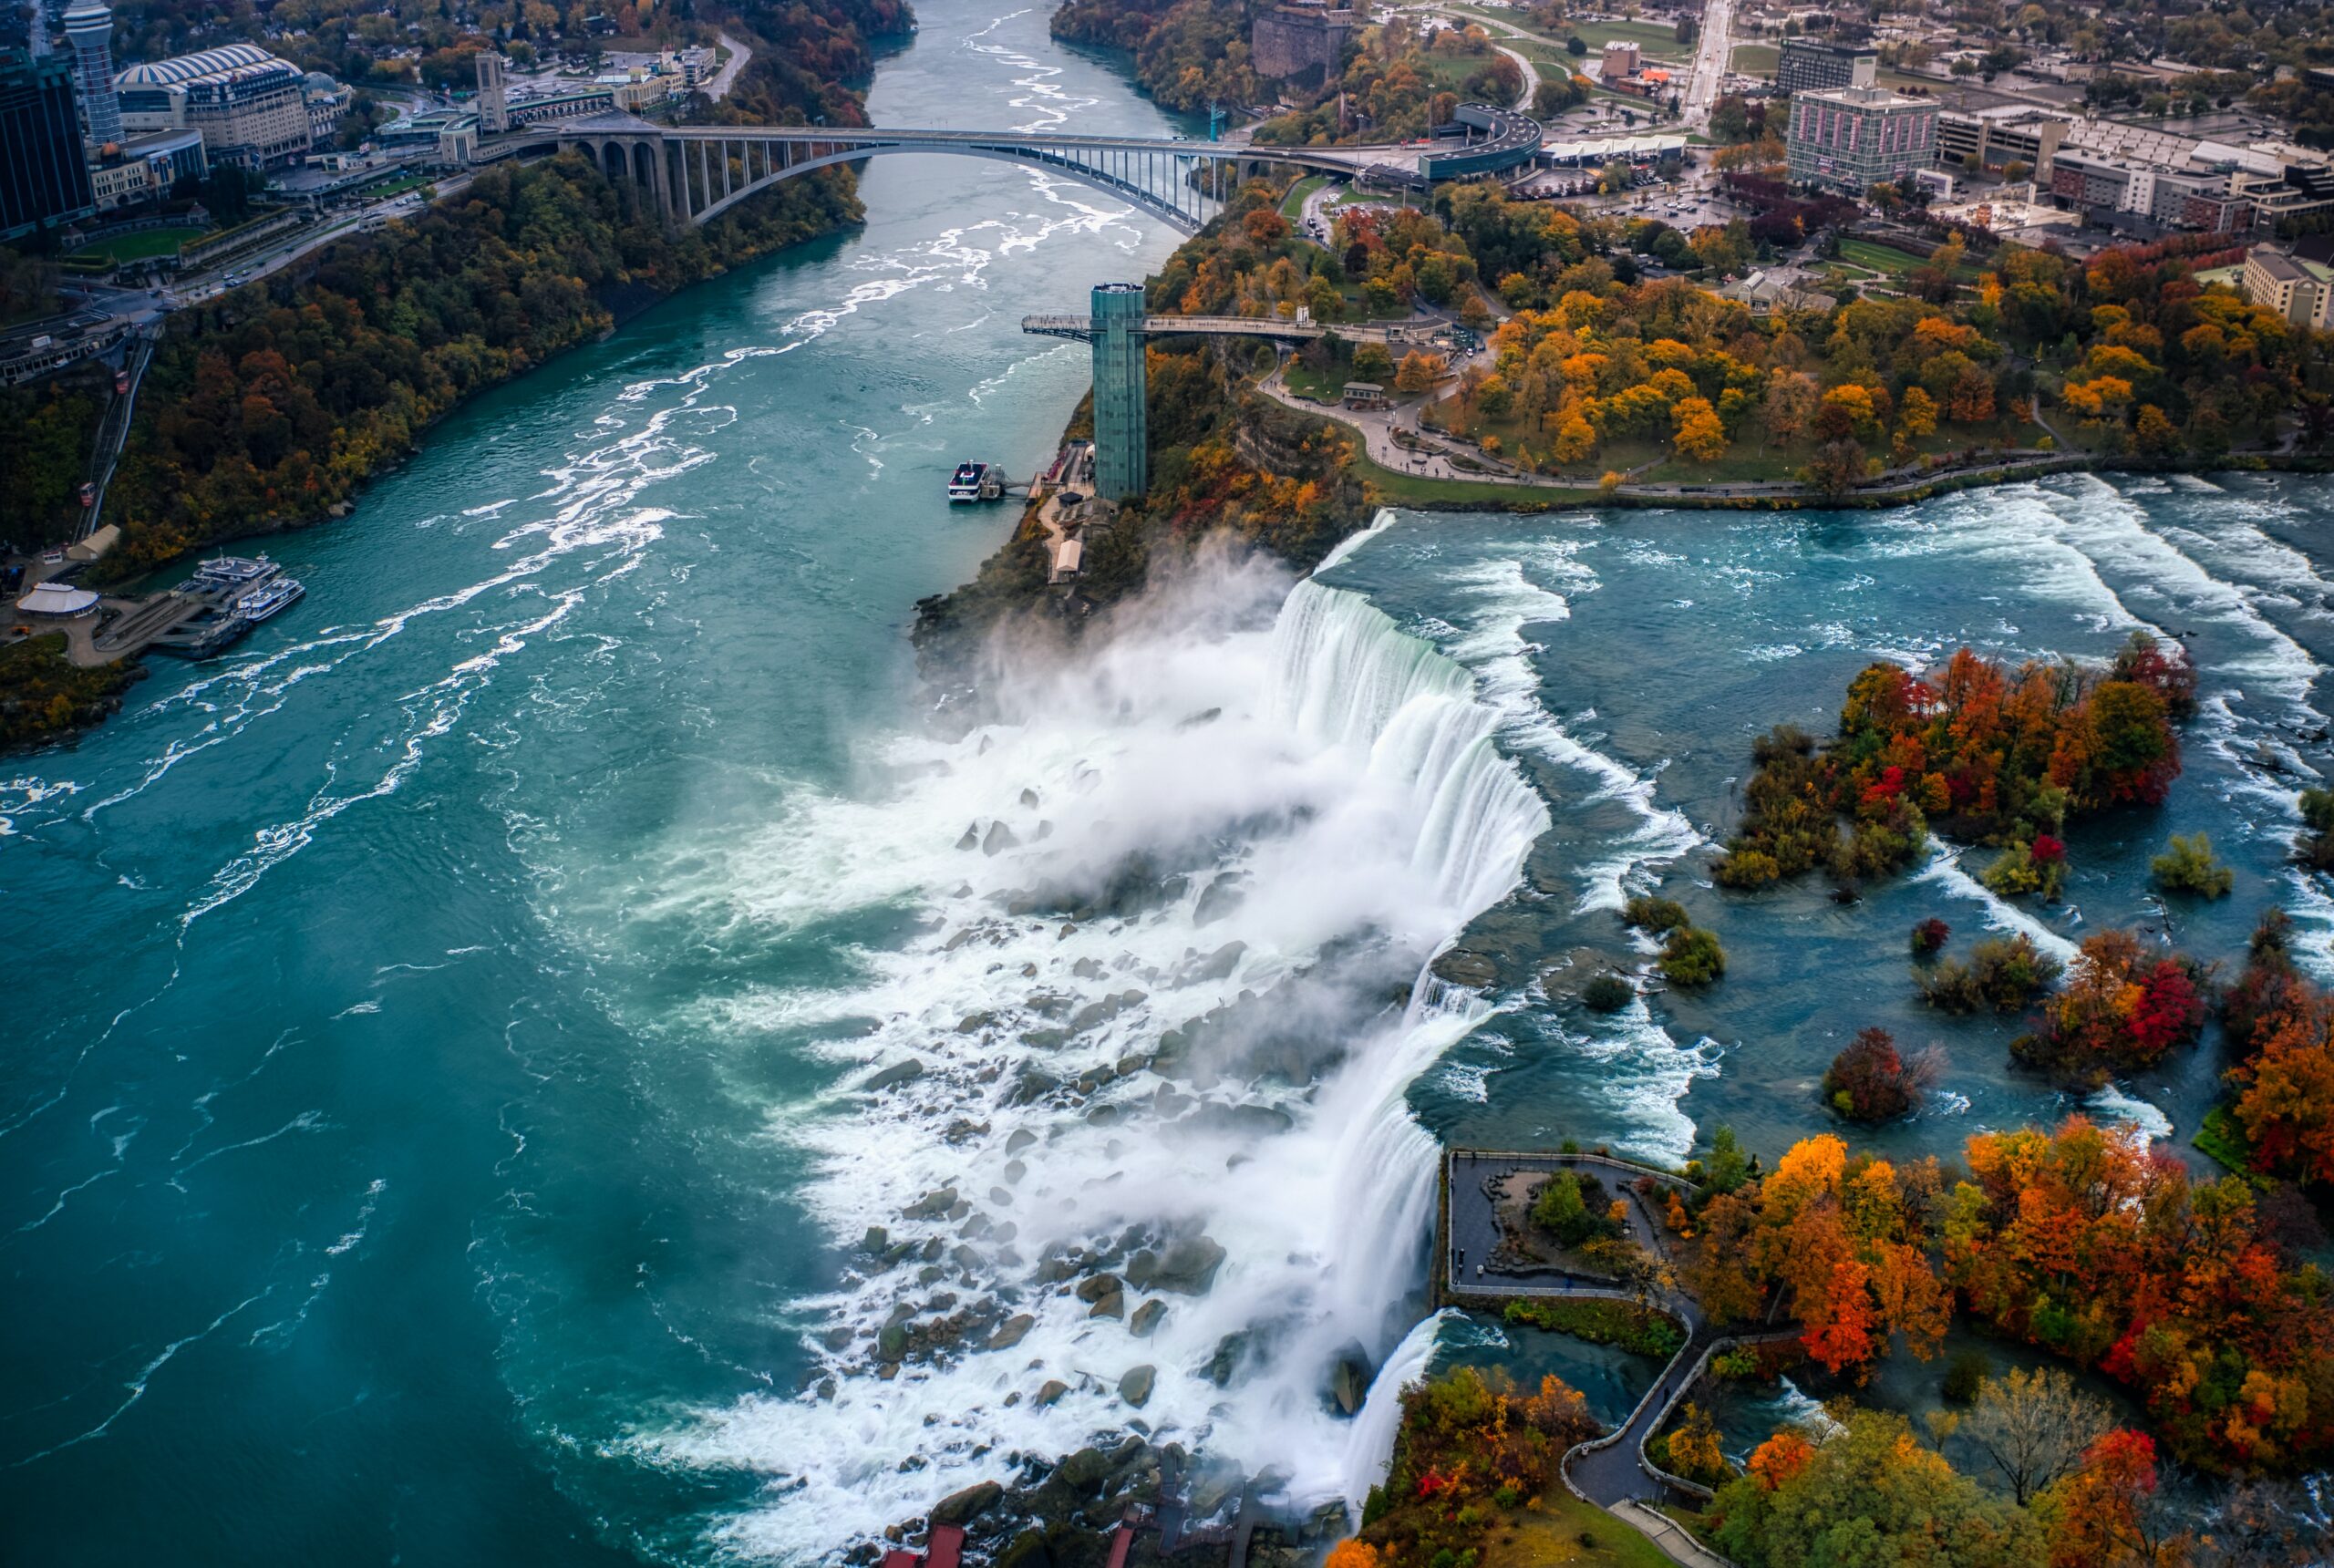 Niagara Falls: The Best Place To Visit In Canada